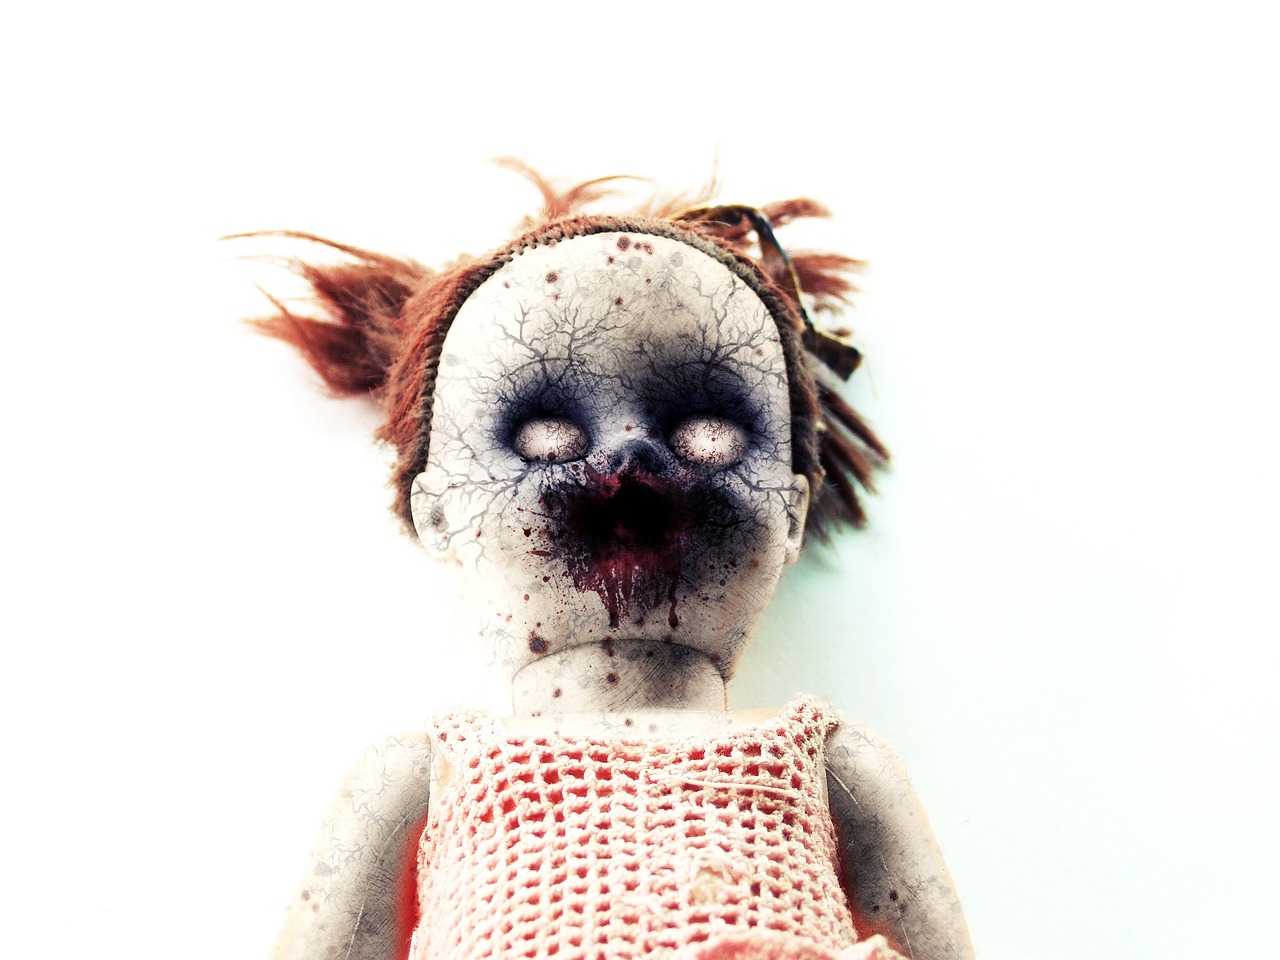 a close up of a doll with blood on it's face, by Anita Kunz, on a pale background, grunge, toy photo, terrified